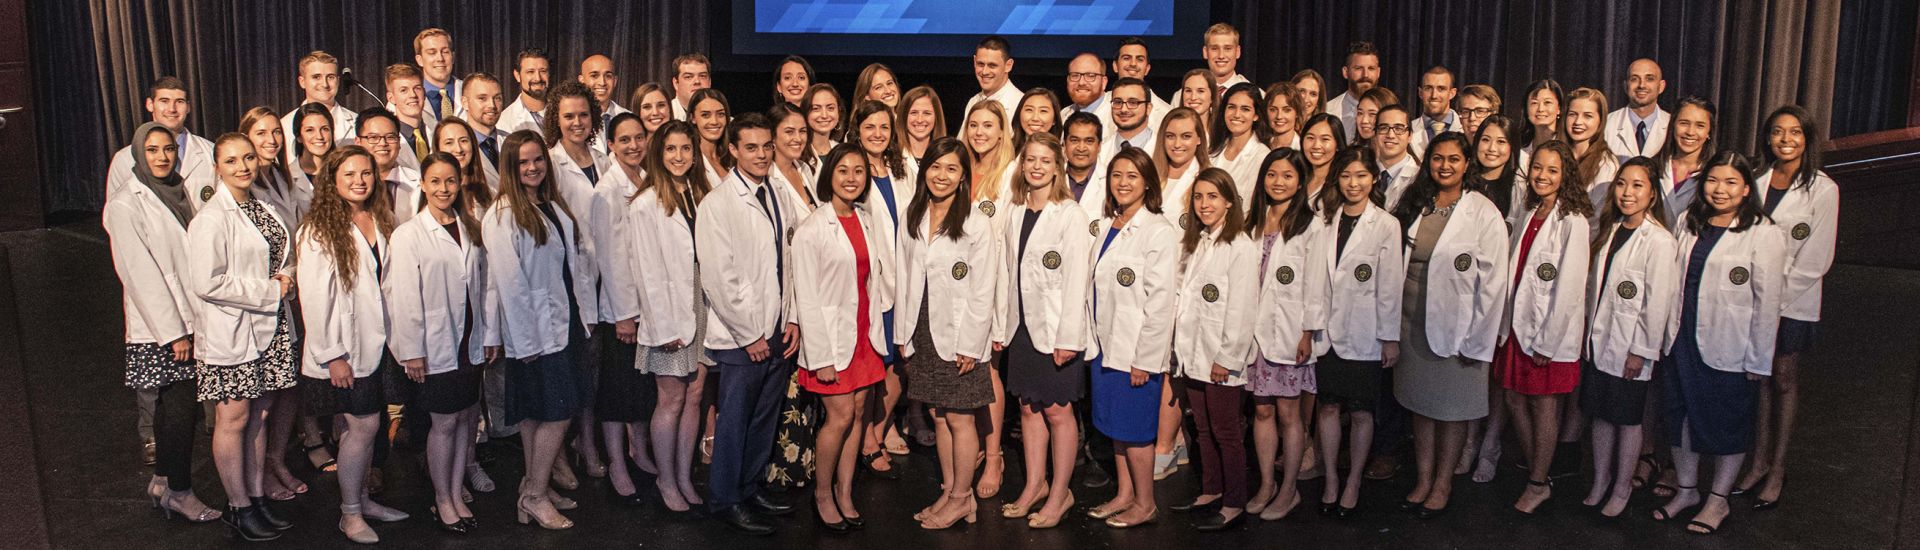 PA White coat students on stage